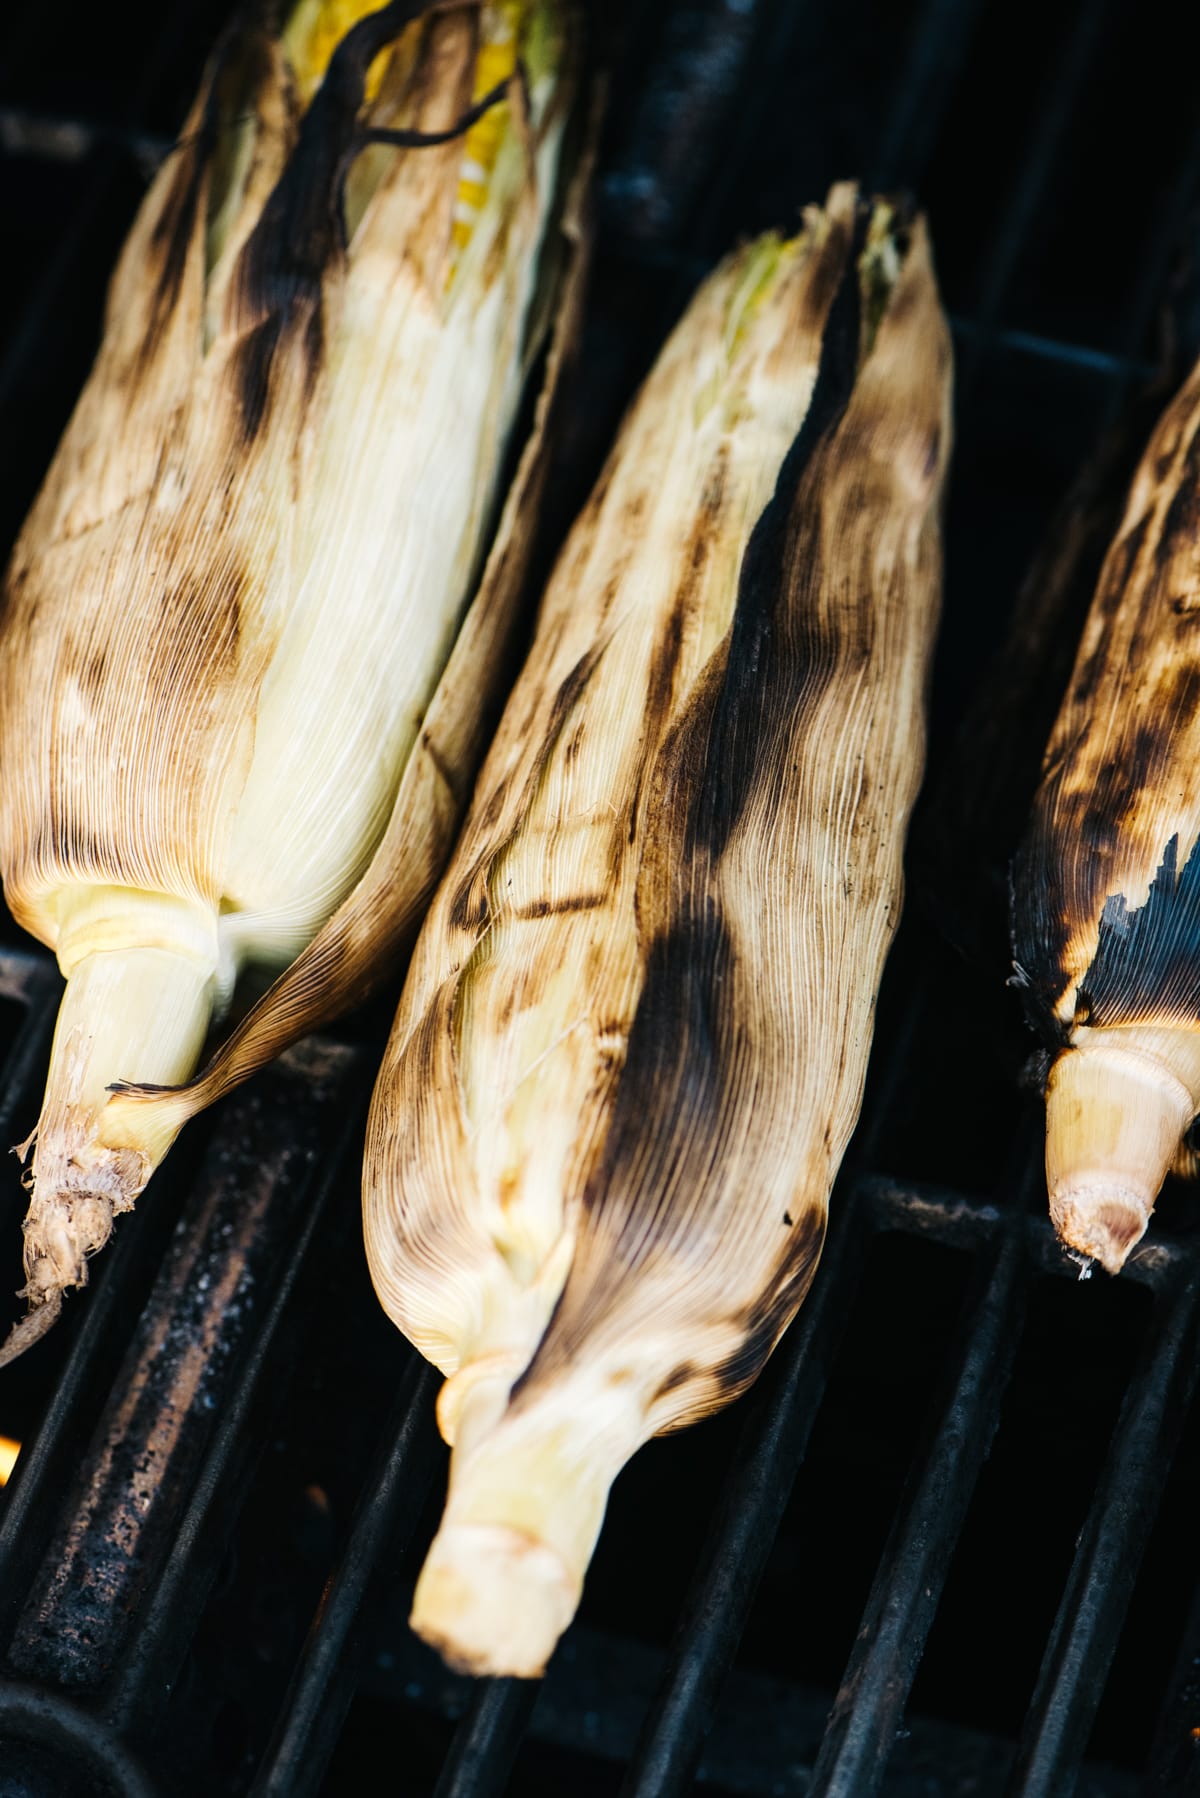 Four ears of corn on a gas grill, showing the husks very charred.